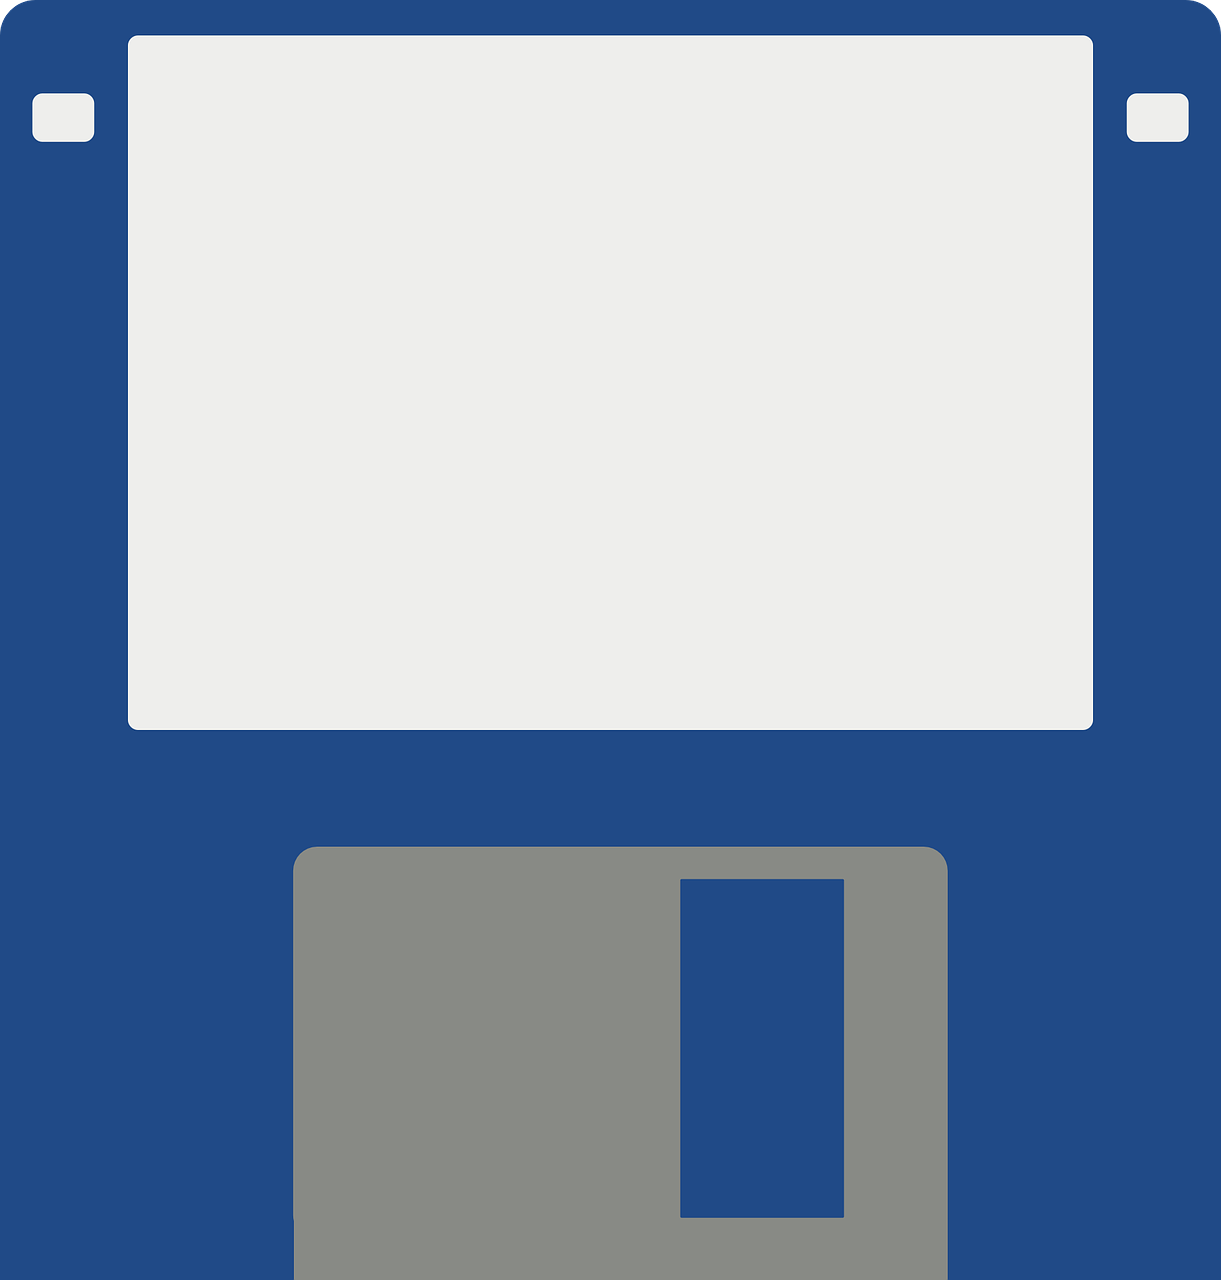 floppy disk 1 44 inches